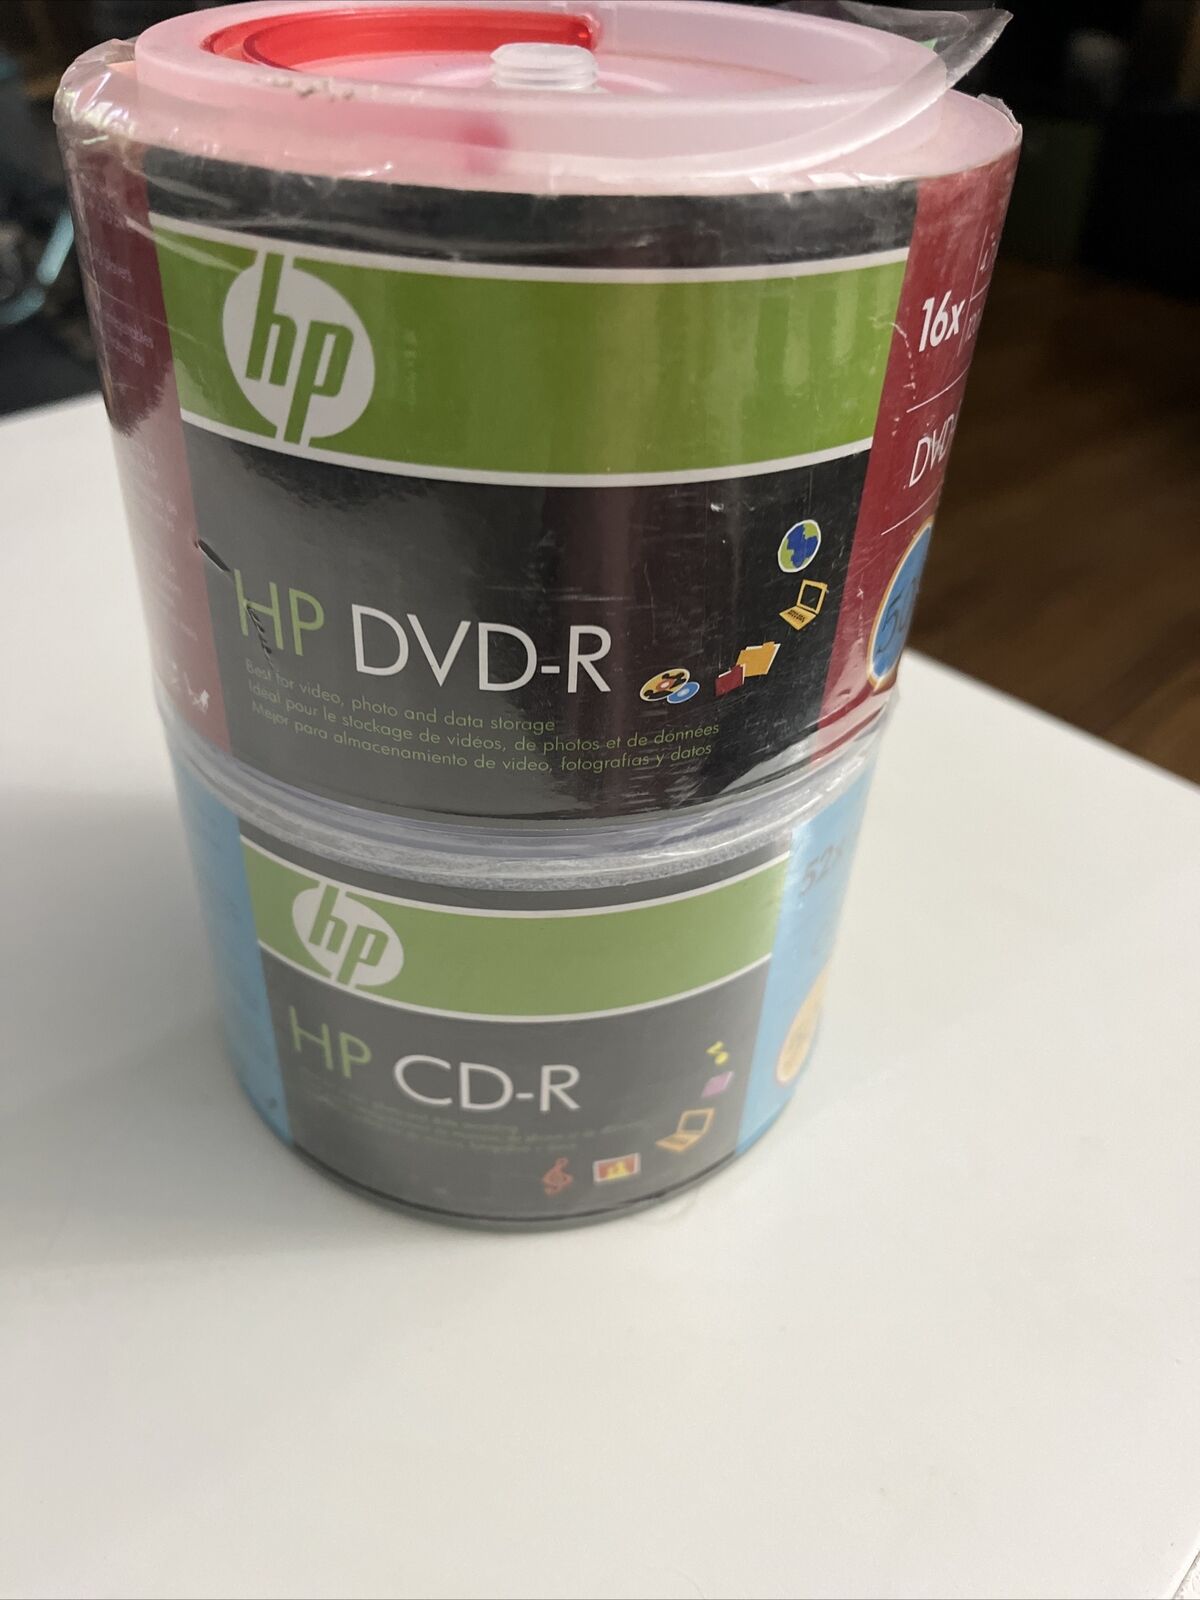 Combo Pack 50 CD-R/50 DVD-R - HP Brand - BRAND NEW IN PACKAGE